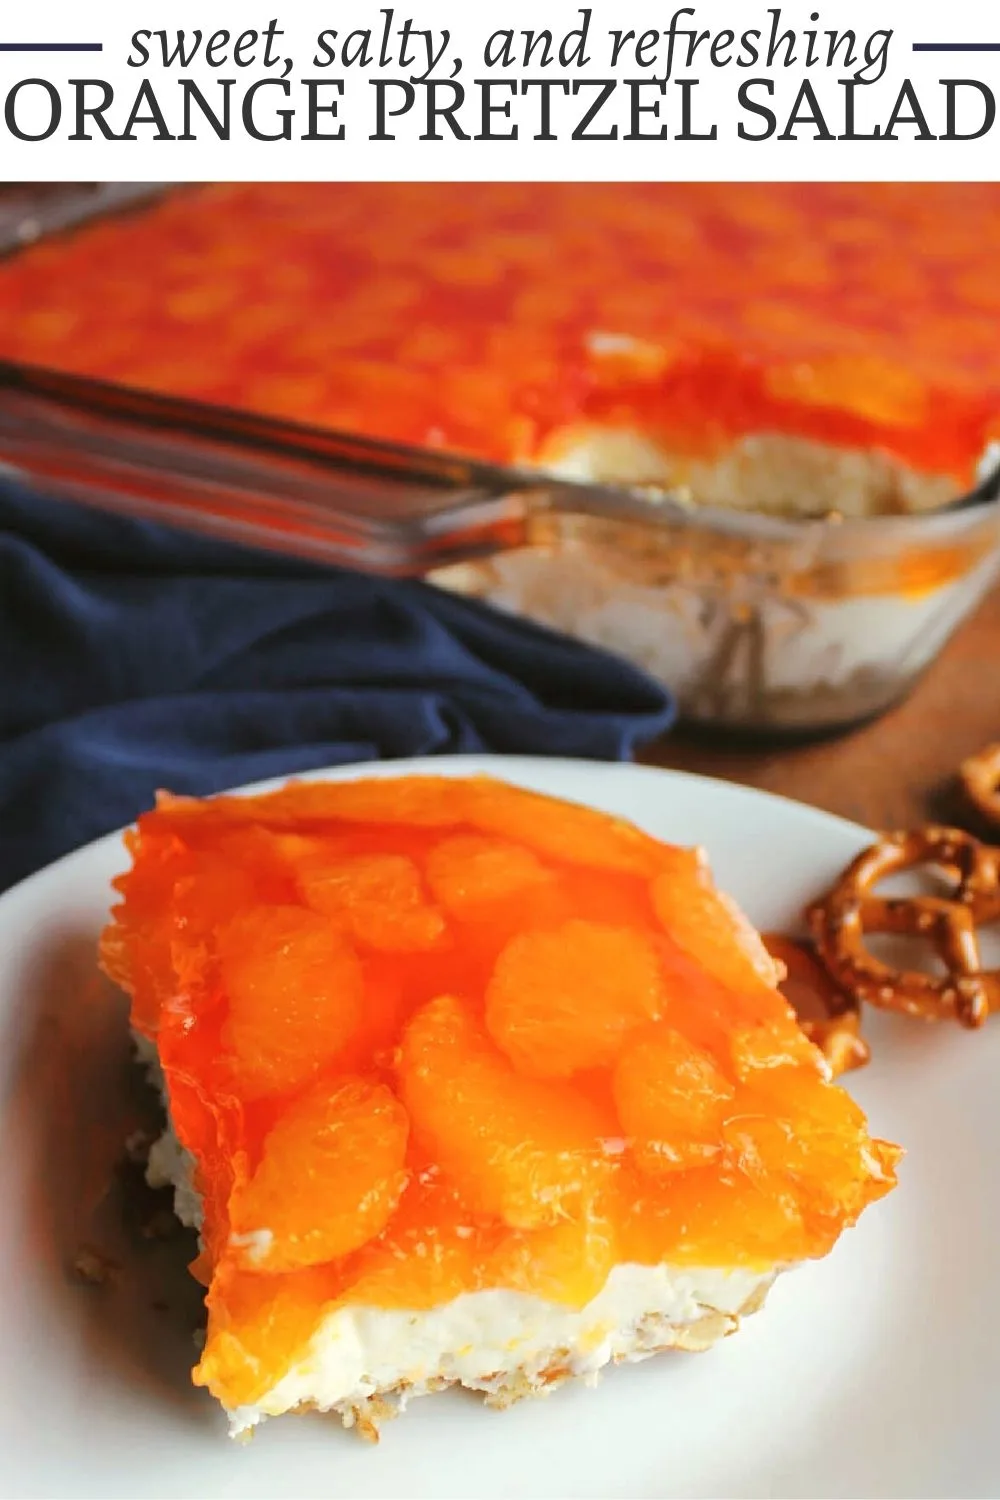 If you are looking for a sweet and salty refreshing treat, you are in the right place. This orange pretzel salad is a fun citrusy twist on a summer classic. Make one to see how good it is for yourself.